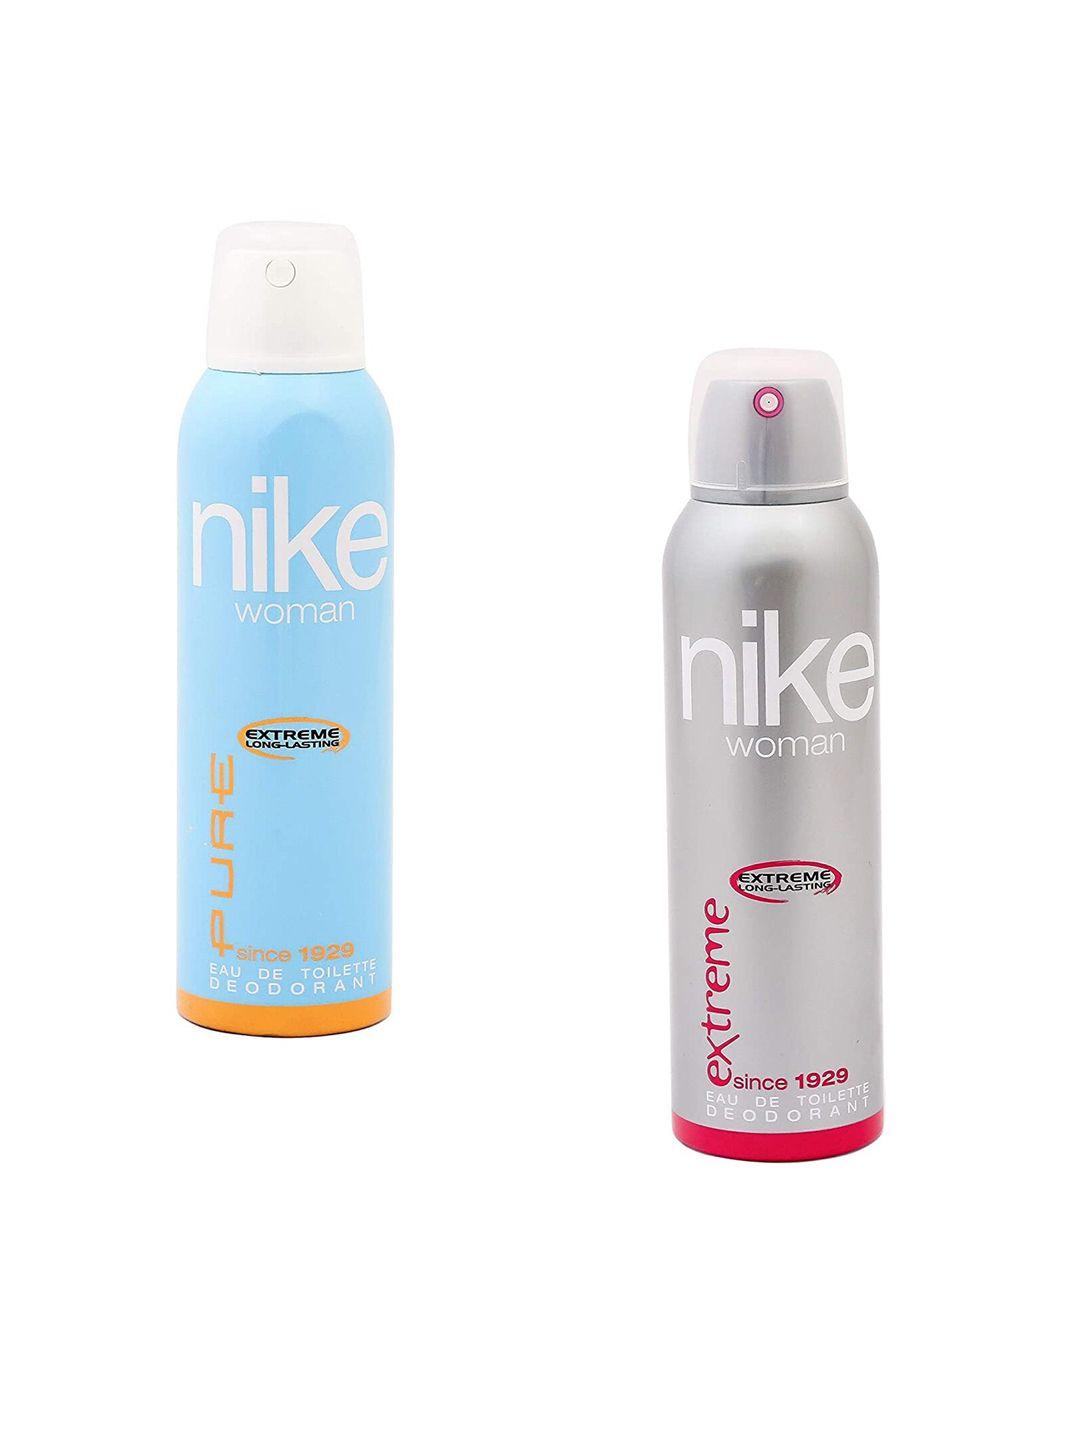 nike women set of 2 extreme long lasting edt deodorants 200ml each - extreme & pure